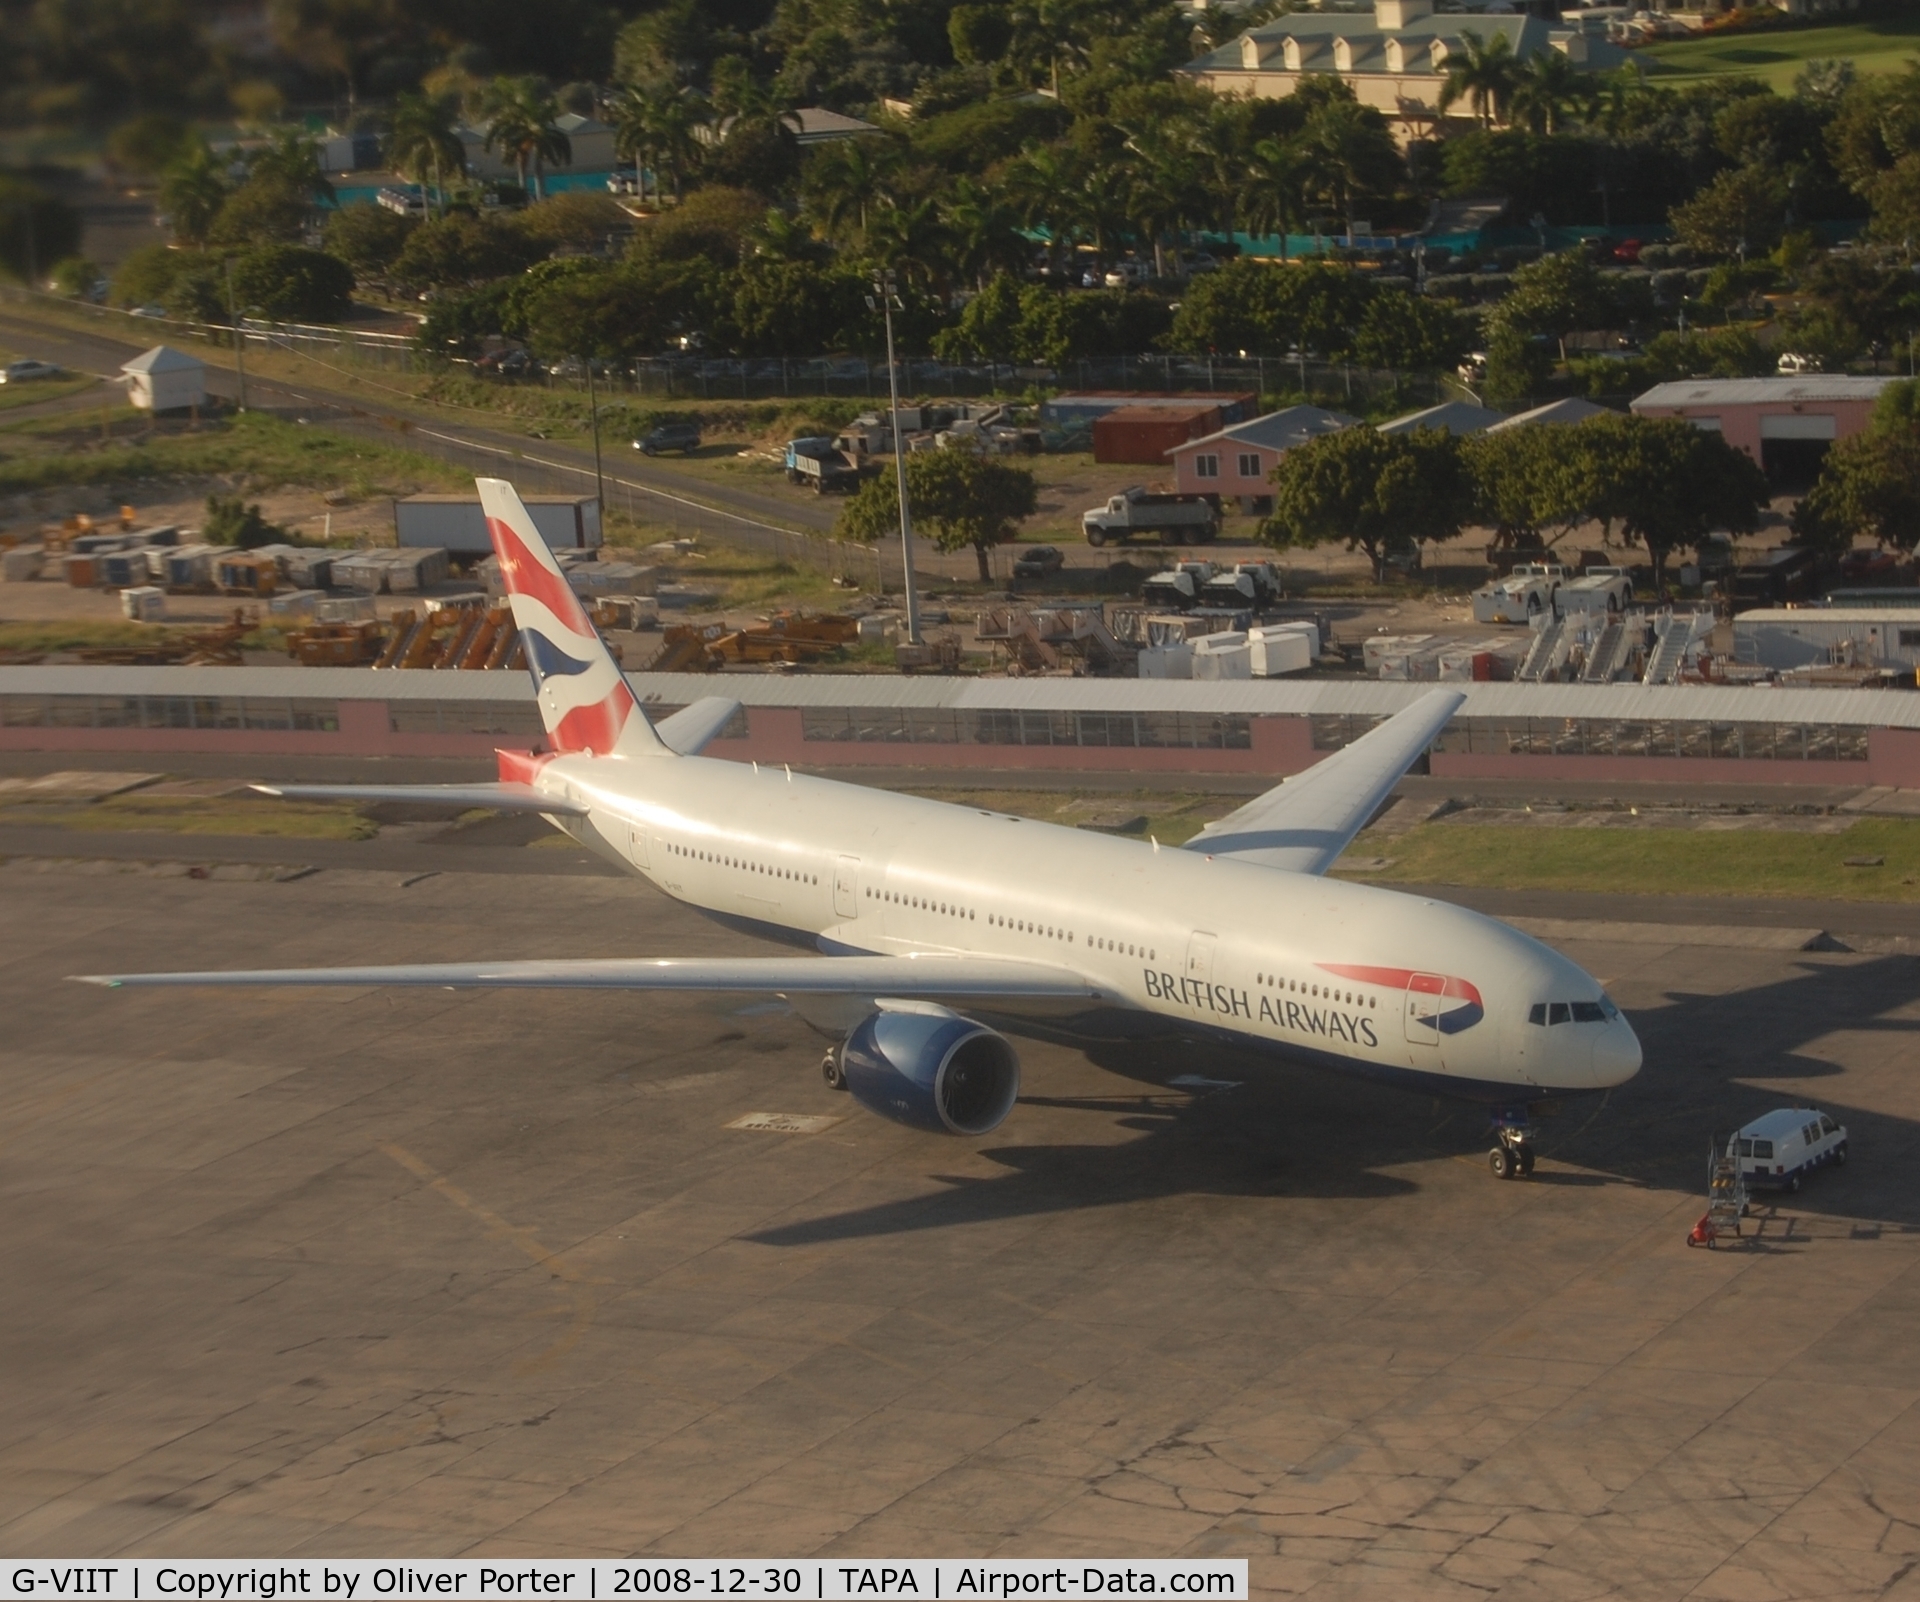 G-VIIT, 1999 Boeing 777-236 C/N 29962, BA2156 on the ground in Antigua as we take off for SJU onboard AA5027